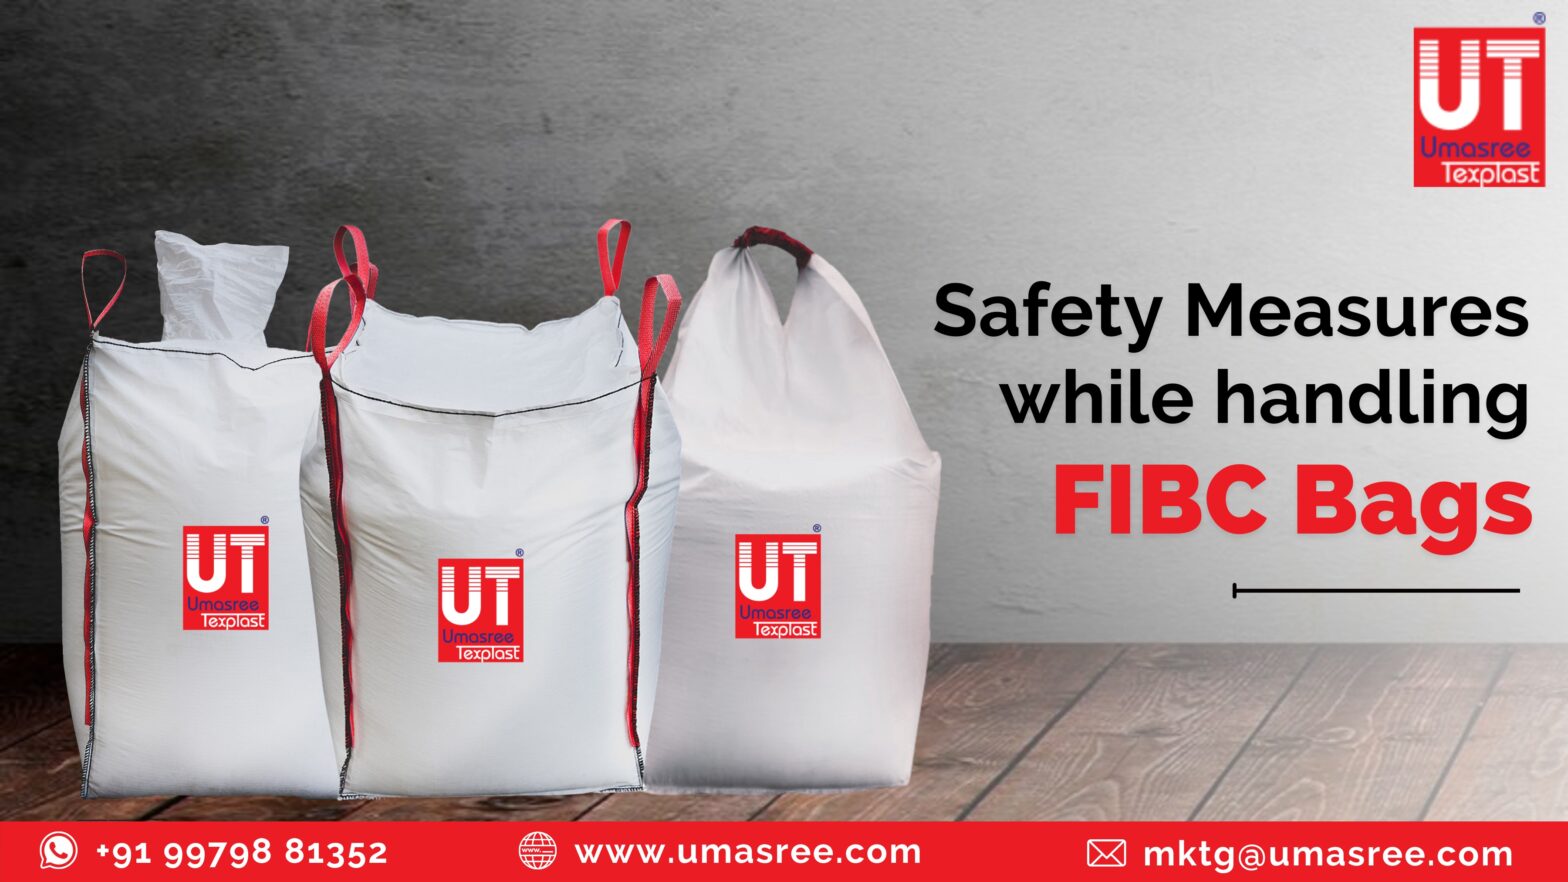 Safety Measures while handling FIBC Bags